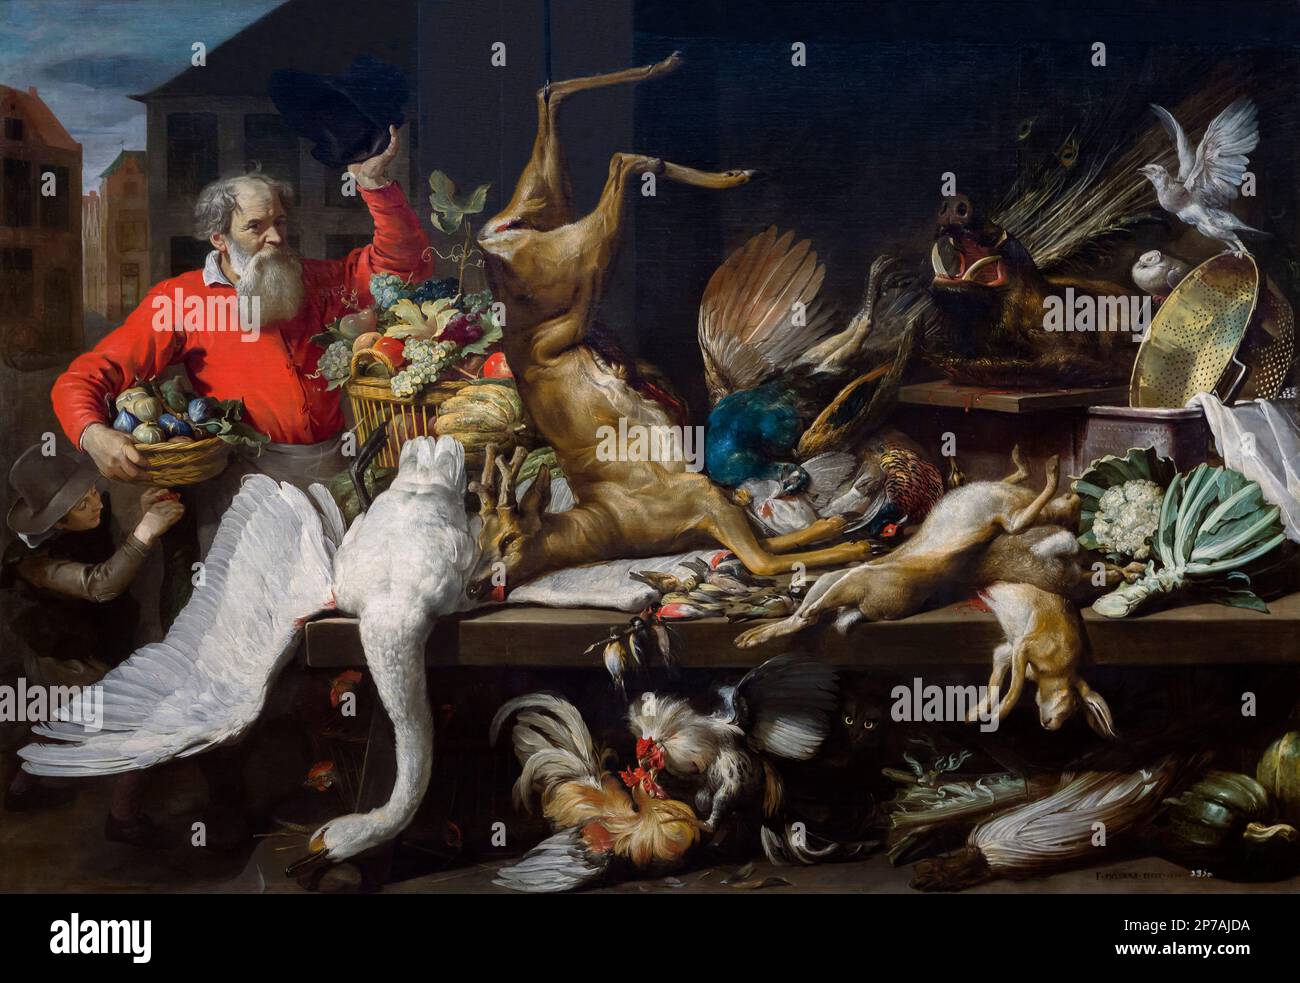 Still Life with Dead Game Fruits amd Vegetables in a Market, Frans Snyders, 1614, Art Institute of Chicago, Chicago, Illinois, USA, North America, Stock Photo